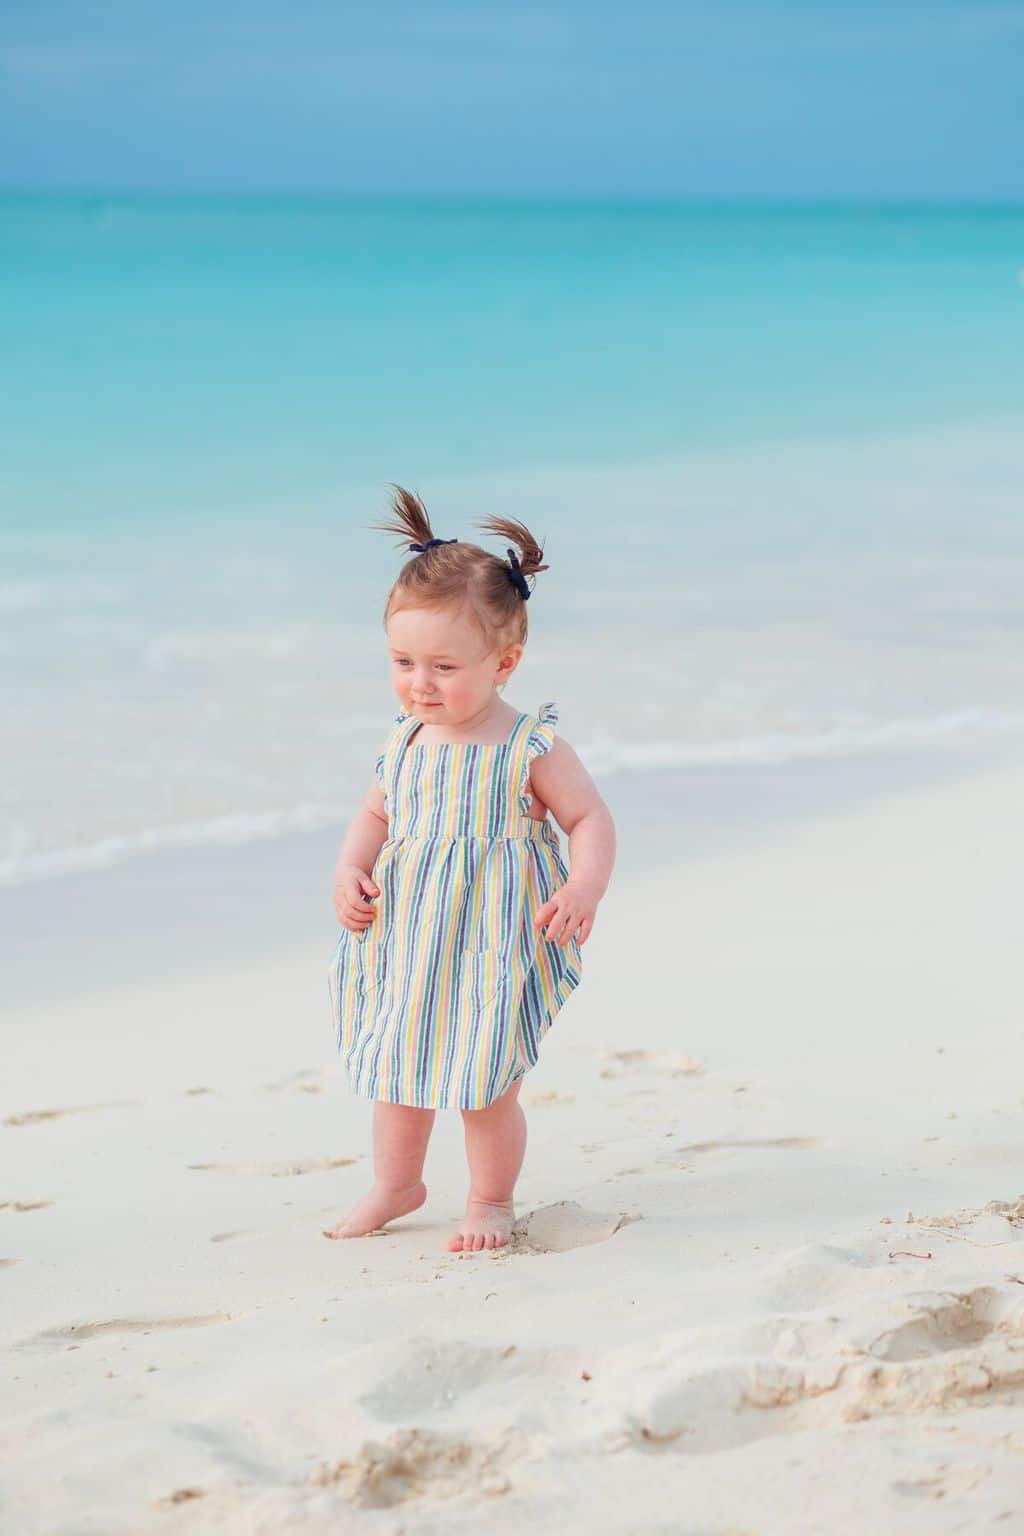 Our Trip To Beaches Turks & Caicos — A Family Friendly All-inclusive Resort, the perfect vacation for big groups and families with kids! by top Houston lifestyle blogger Ashley Rose of Sugar & Cloth